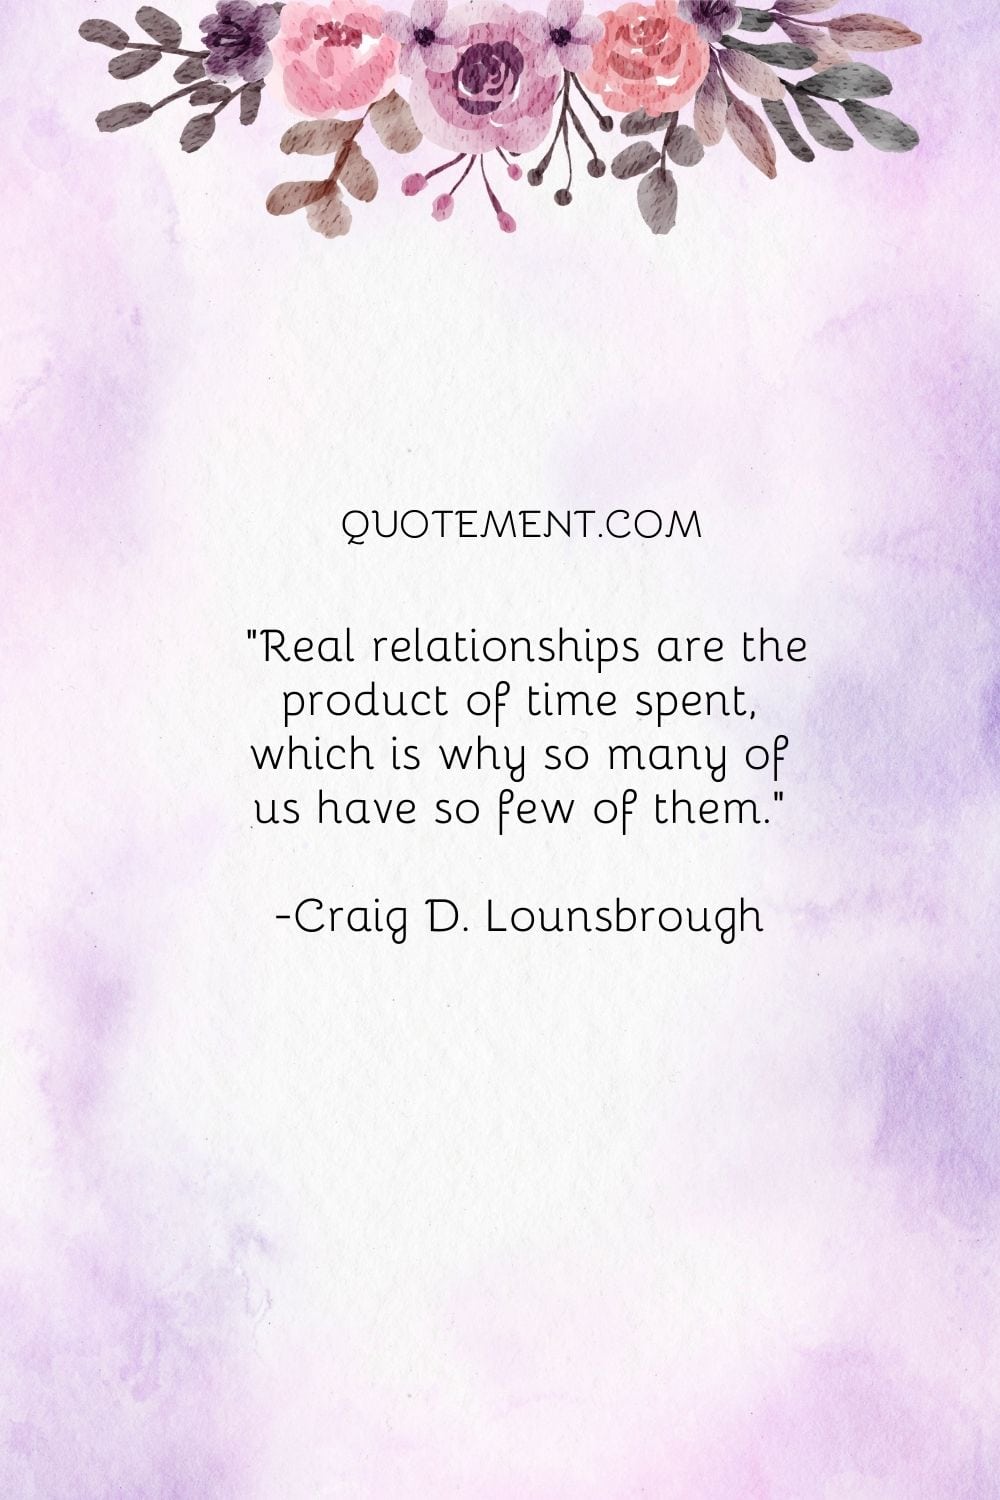 Real relationships are the product of time spent, which is why so many of us have so few of them.